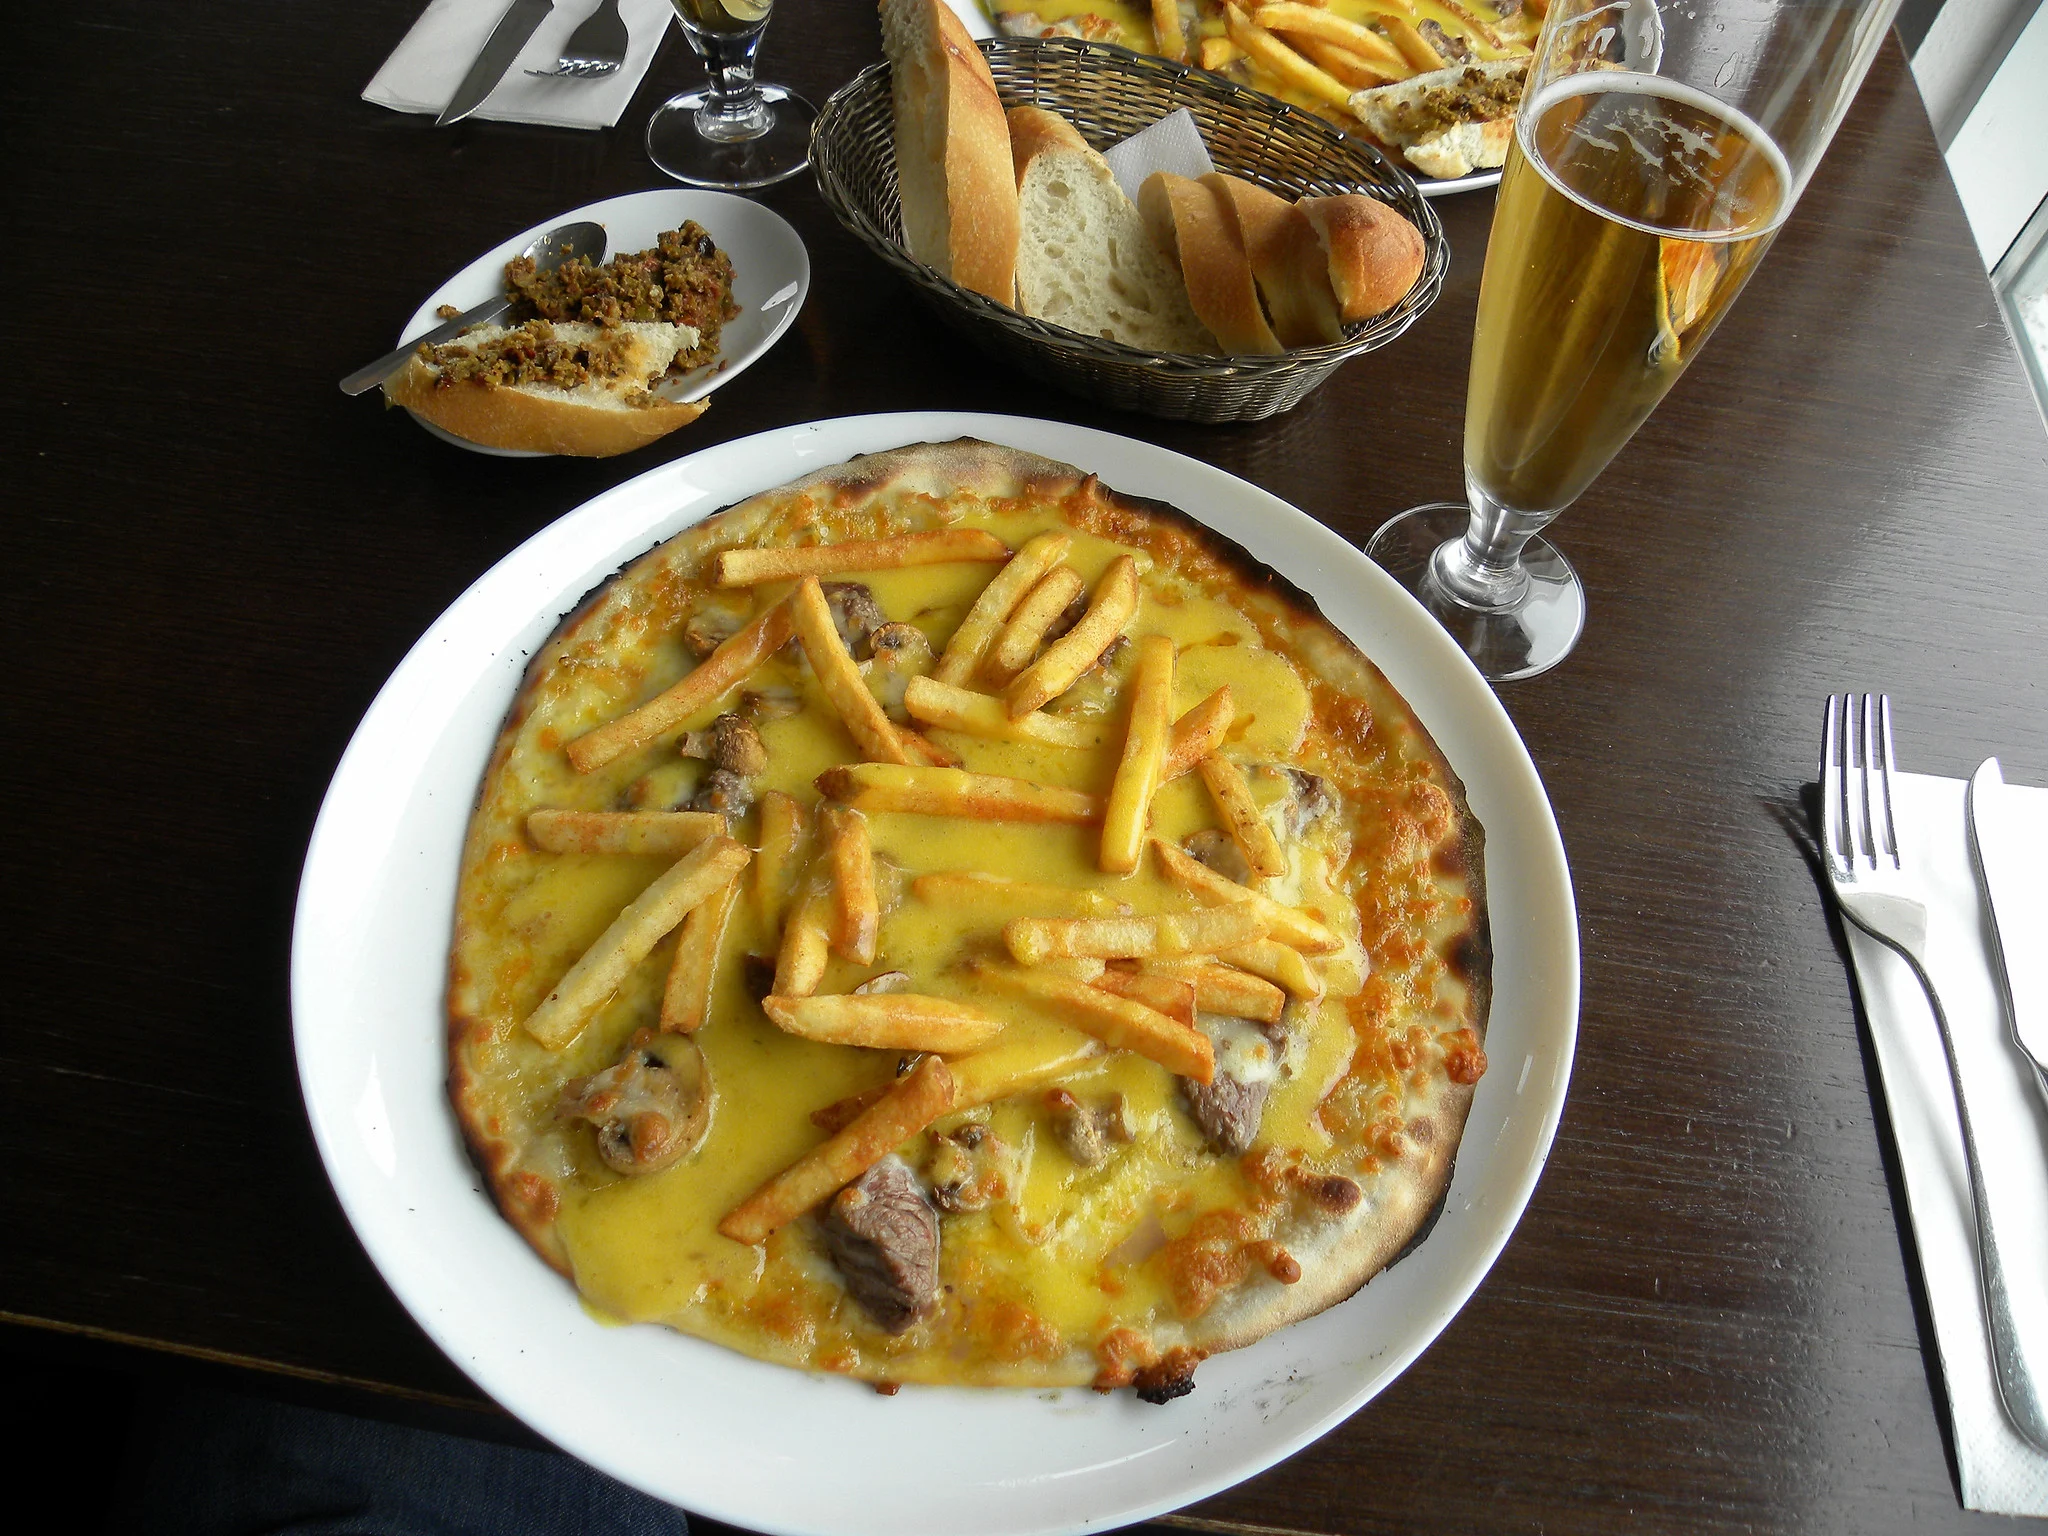 Bokullupizza served on a white plate at Strikid(Strikið), considered as one of the best restaurants in Iceland, a pizza topped with beef, bernaise sauce, cheese and french fries